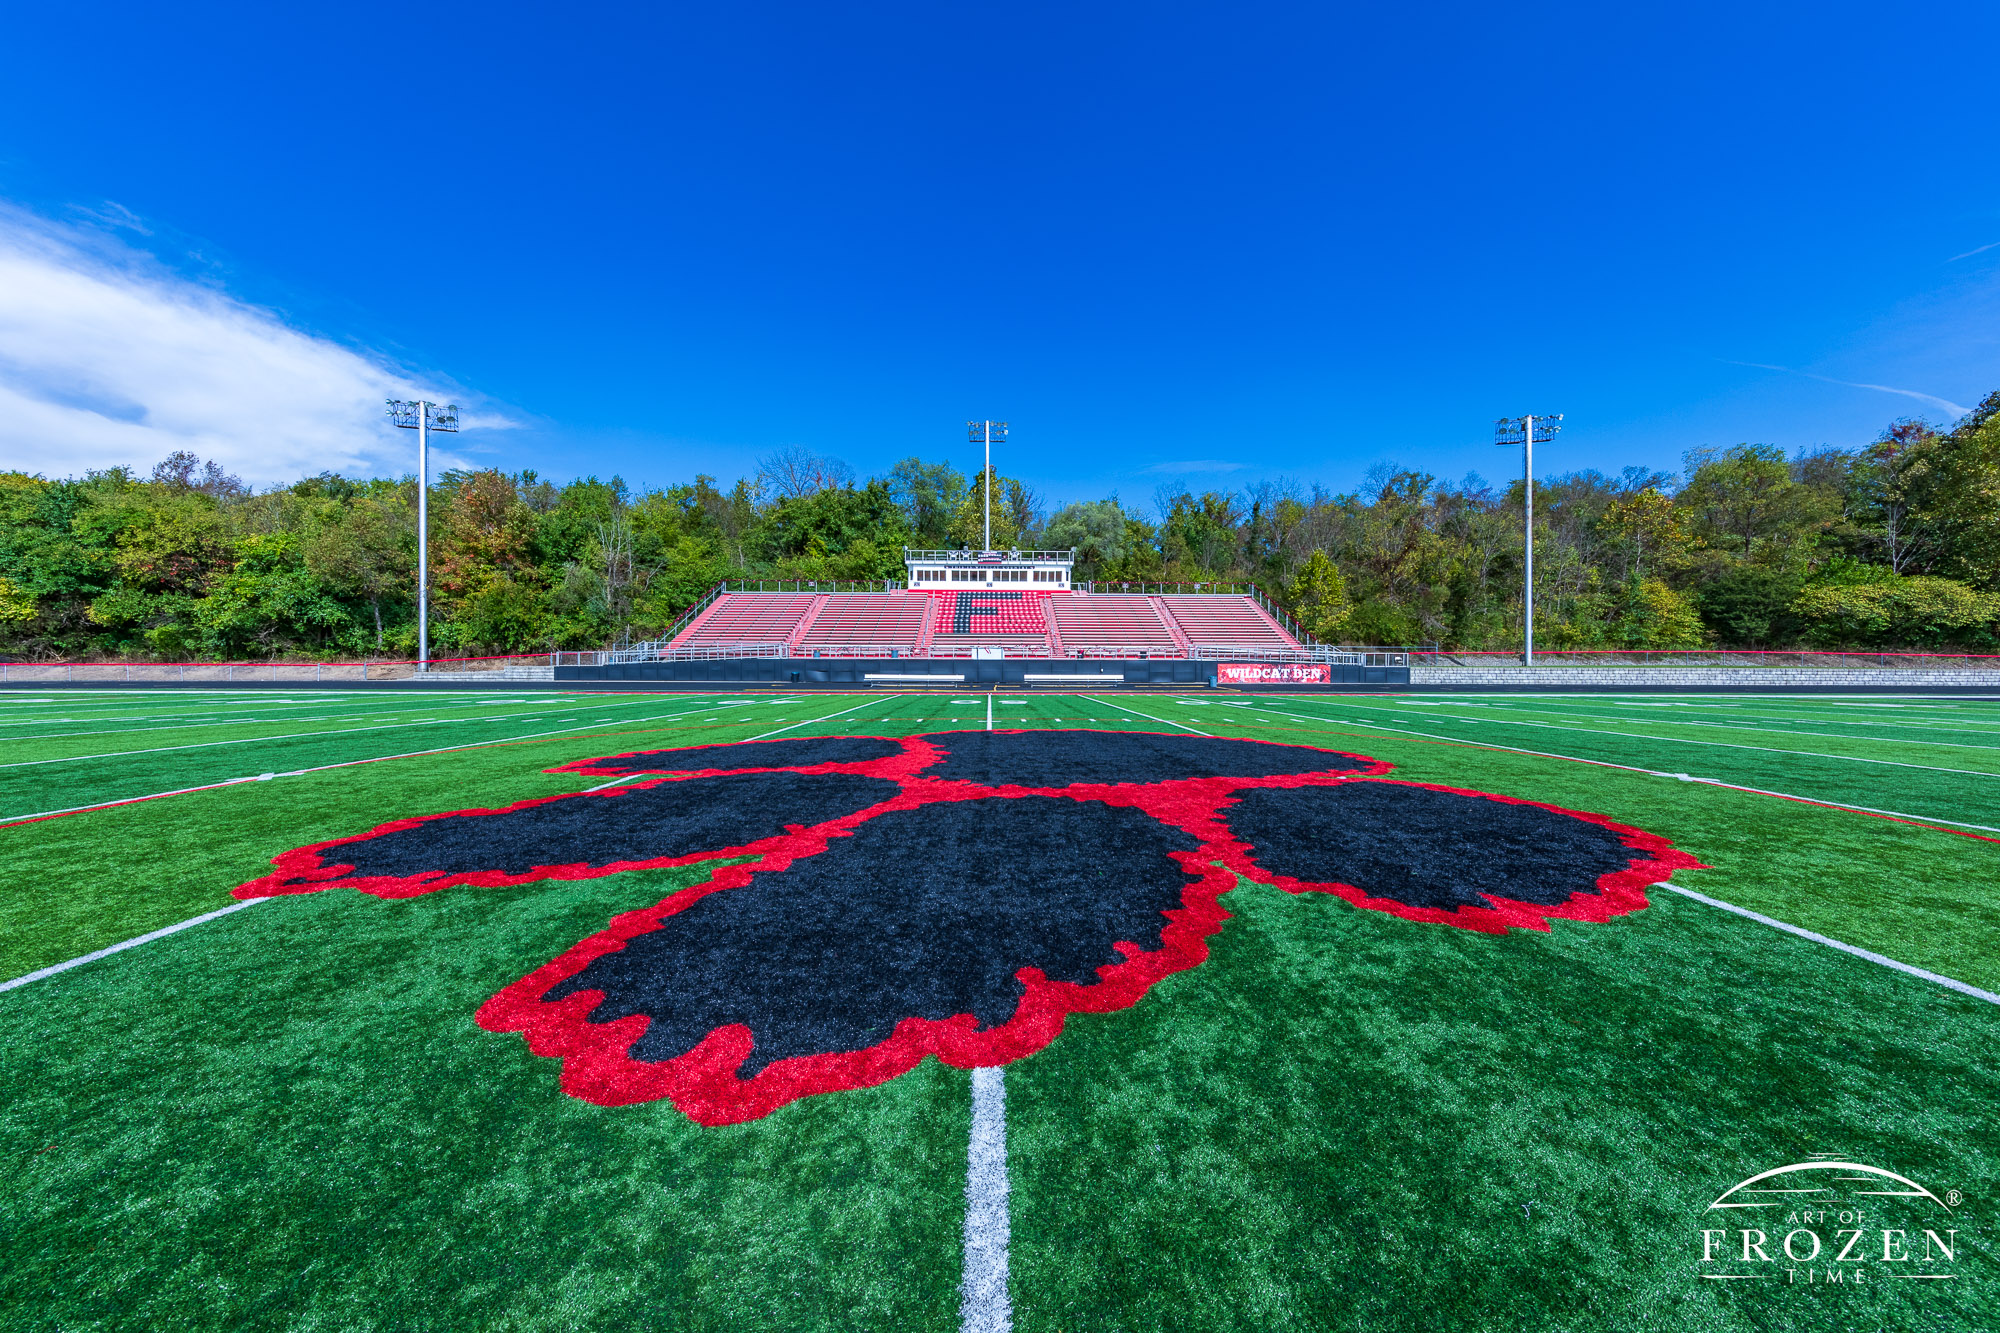 Mid field of the Franklin High School’s Wildcat stadium where the paw print logo occupies the foreground and the Franklin, Ohio bleachers in the distance